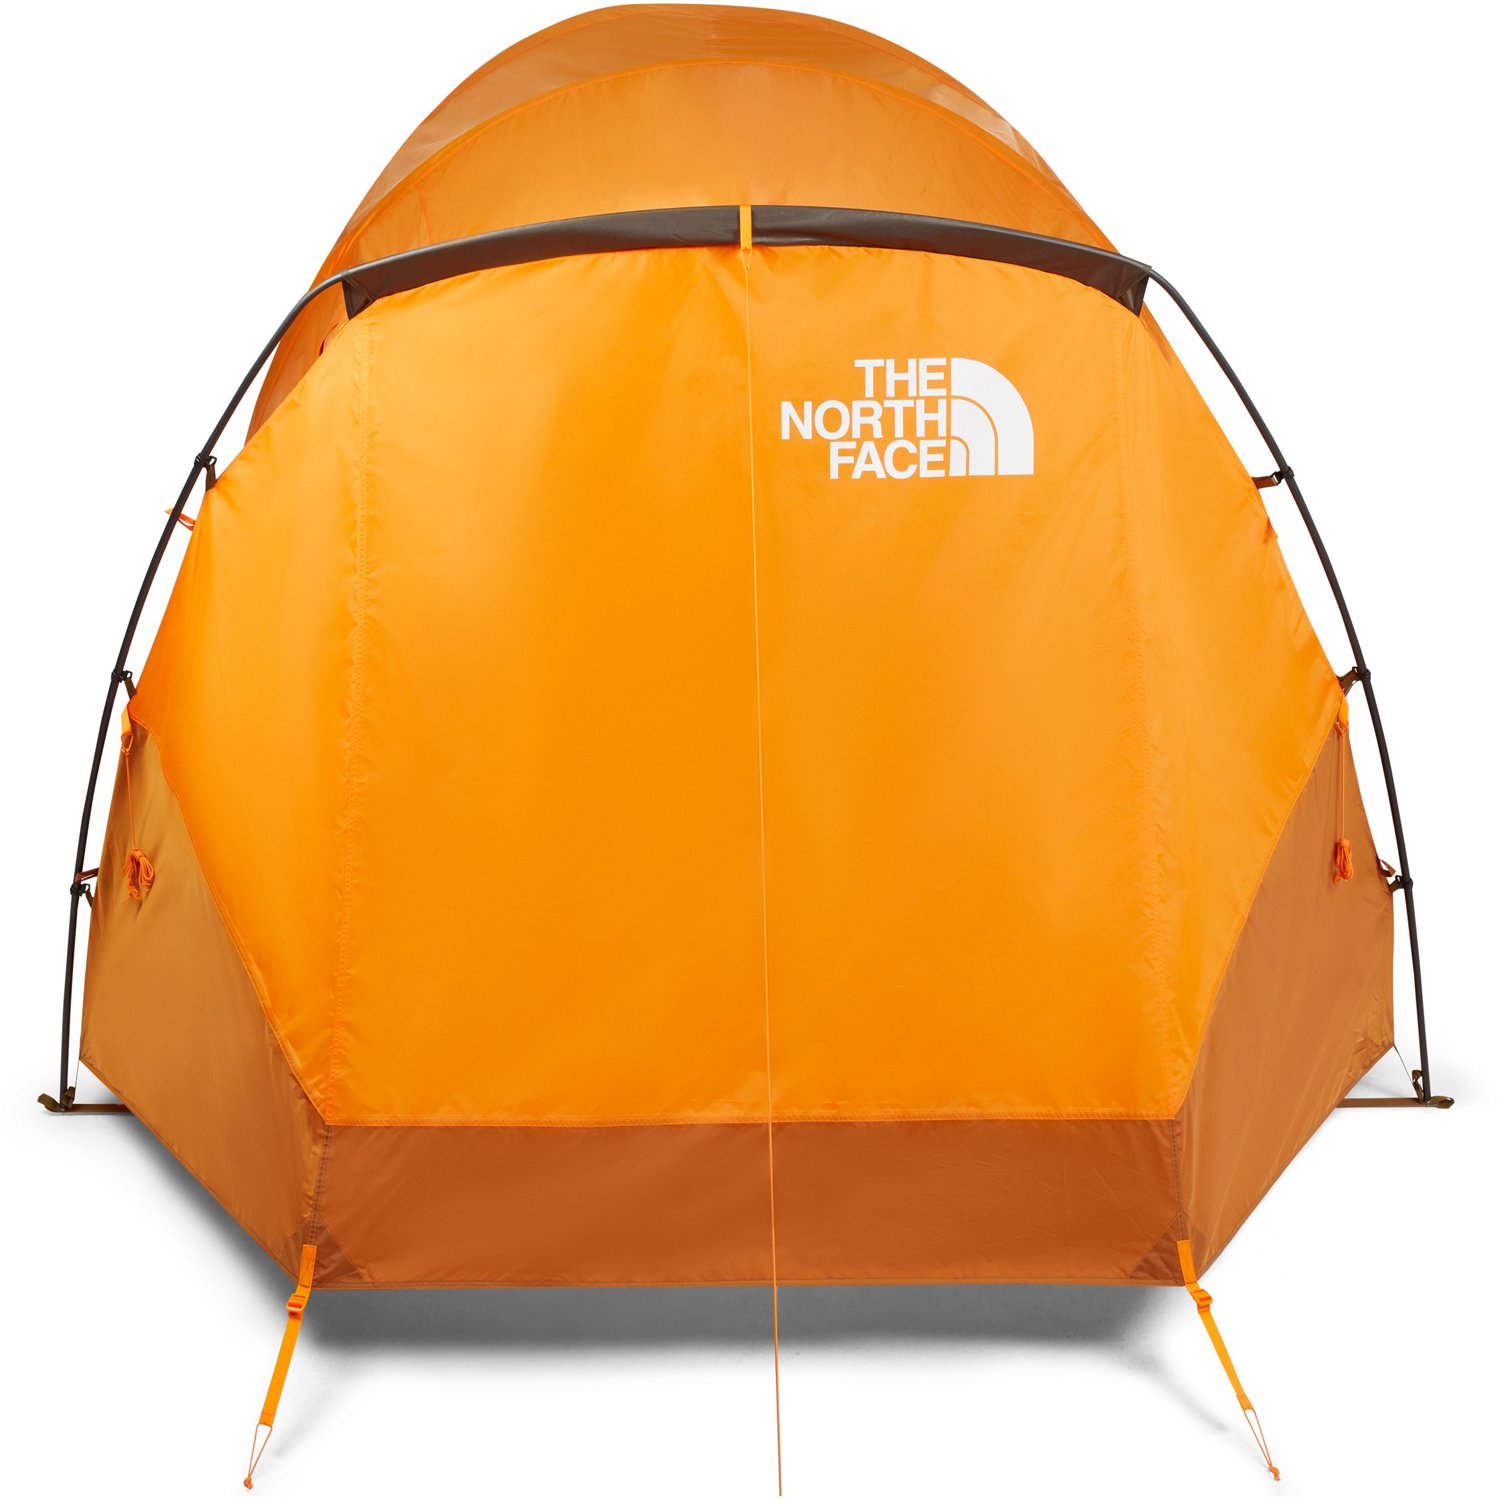 The North Face Wawona 6 Person Dome Tent | Academy